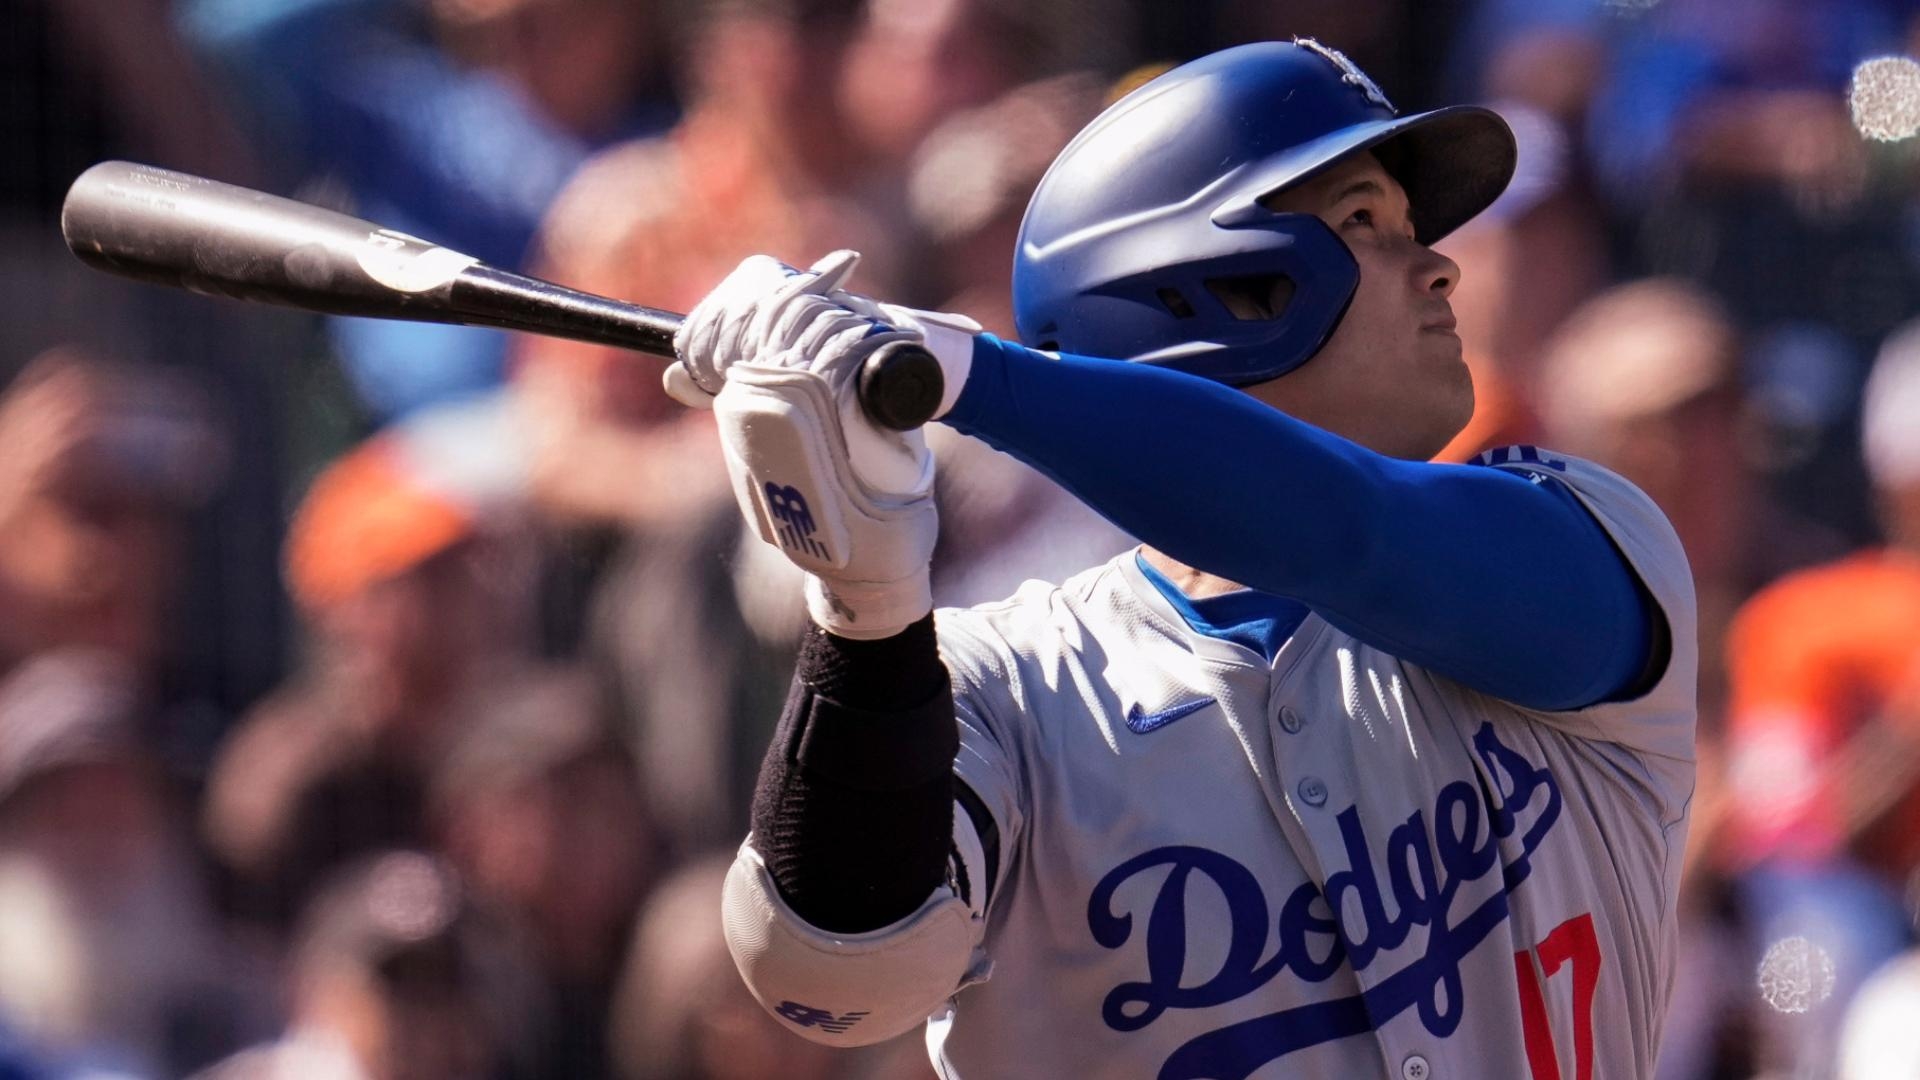 Shohei Ohtani hammers his 26th HR for Dodgers